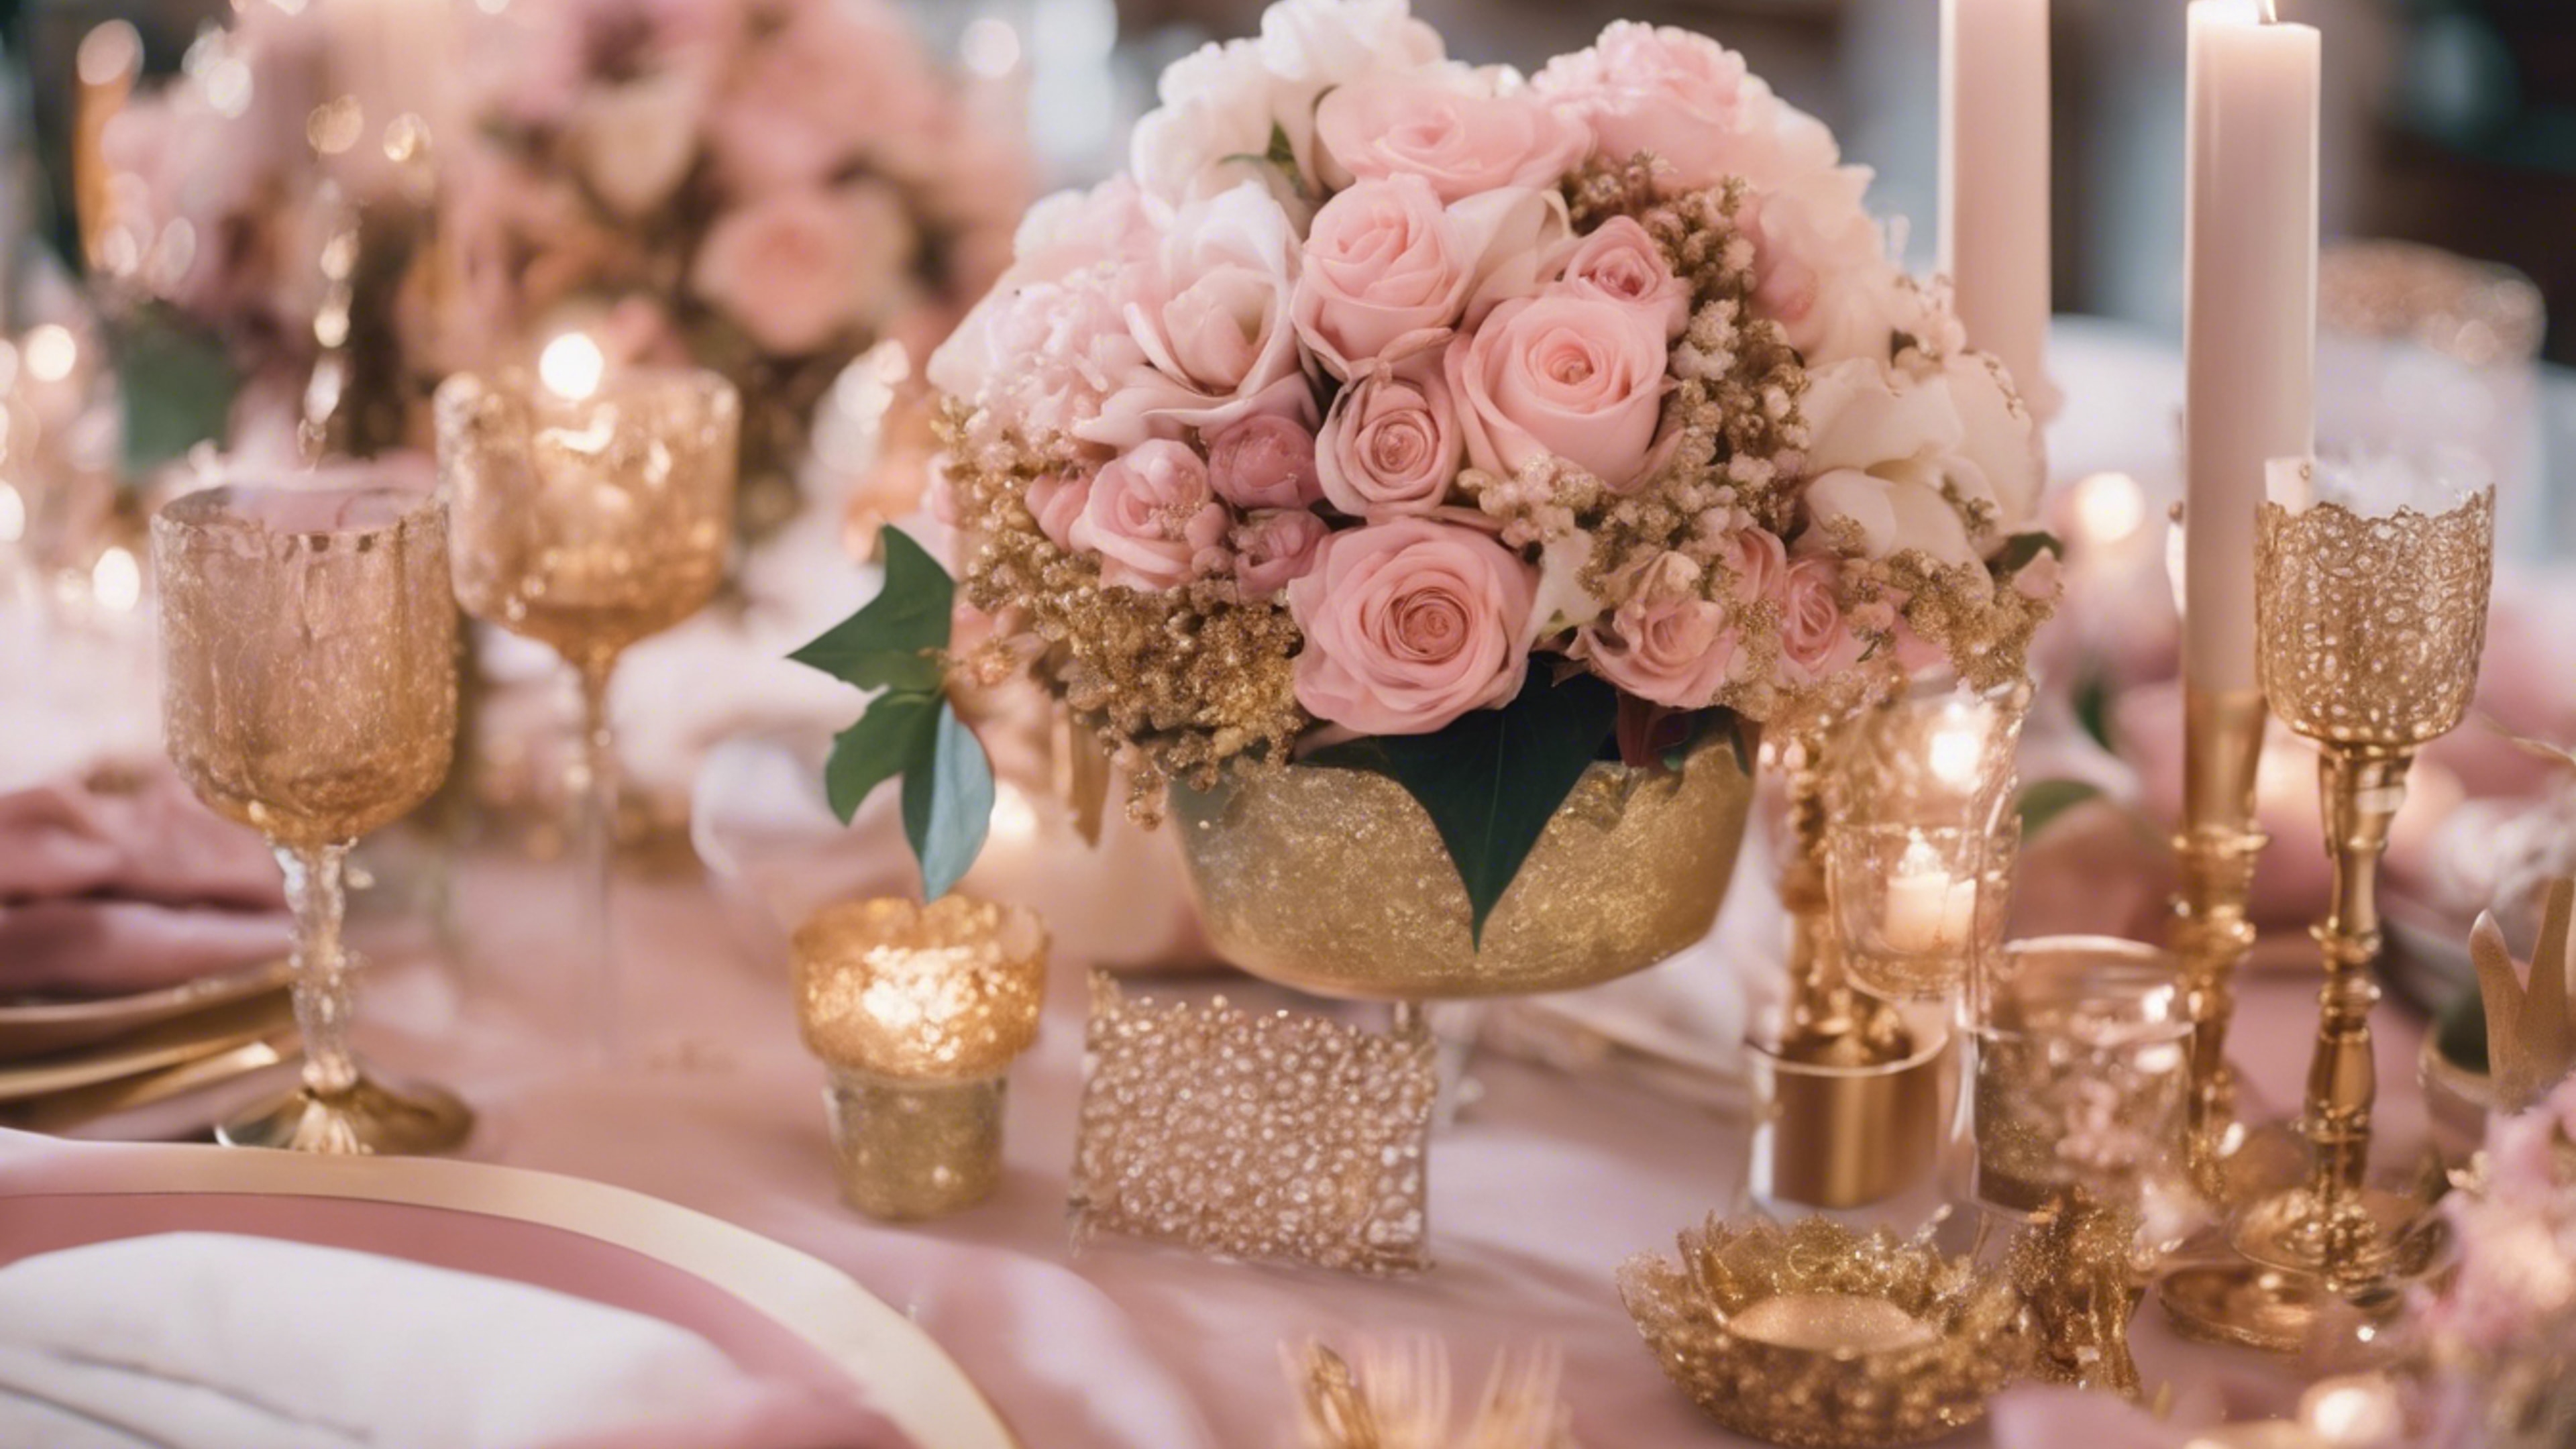 An ethereal pink and gold themed wedding decorations with flowers and metallic accents. Tapeta[814998f188fb45f48f1c]